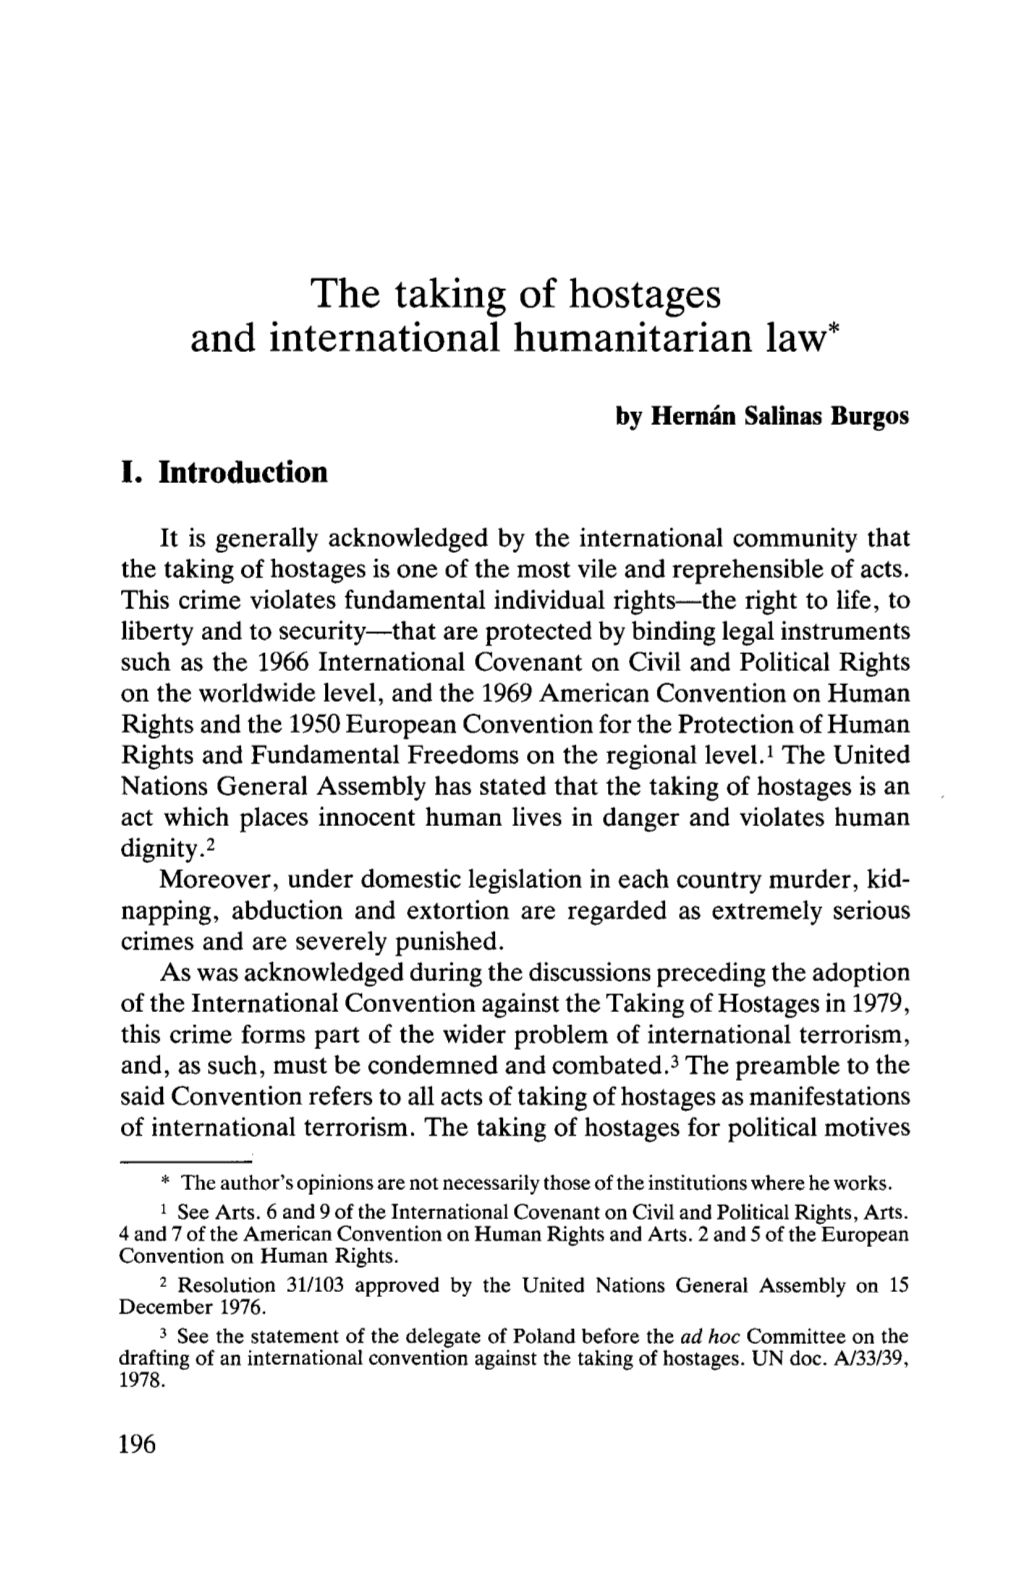 The Taking of Hostages and International Humanitarian Law*